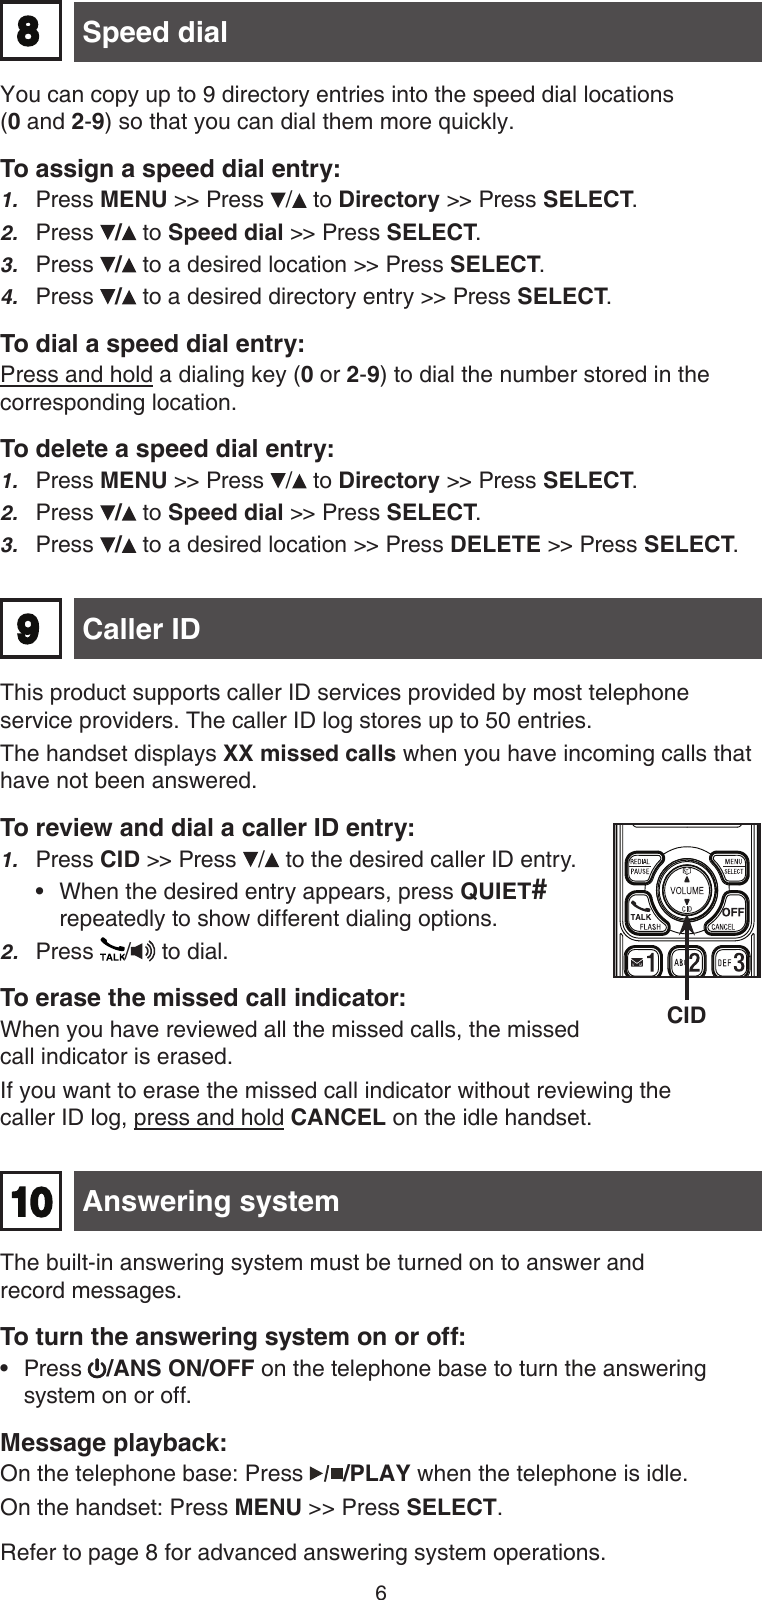 6This product supports caller ID services provided by most telephone service providers. The caller ID log stores up to 50 entries. The handset displays XX missed calls when you have incoming calls that have not been answered.To review and dial a caller ID entry:Press CID &gt;&gt; Press /  to the desired caller ID entry.When the desired entry appears, press QUIET# repeatedly to show different dialing options.2.  Press  /  to dial. To erase the missed call indicator:When you have reviewed all the missed calls, the missed call indicator is erased.If you want to erase the missed call indicator without reviewing the  caller ID log, press and hold CANCEL on the idle handset.1.• Caller ID Answering system10The built-in answering system must be turned on to answer and  record messages.To turn the answering system on or off:Press  /ANS ON/OFF on the telephone base to turn the answering system on or off. Message playback:On the telephone base: Press  /PLAY when the telephone is idle. On the handset: Press MENU &gt;&gt; Press SELECT.Refer to page 8 for advanced answering system operations.•98 Speed dial You can copy up to 9 directory entries into the speed dial locations  (0 and 2-9) so that you can dial them more quickly. To assign a speed dial entry:Press MENU &gt;&gt; Press / to Directory &gt;&gt; Press SELECT.Press /  to Speed dial &gt;&gt; Press SELECT.Press /  to a desired location &gt;&gt; Press SELECT.Press /  to a desired directory entry &gt;&gt; Press SELECT.To dial a speed dial entry:Press and hold a dialing key (0 or 2-9) to dial the number stored in the corresponding location.To delete a speed dial entry:Press MENU &gt;&gt; Press / to Directory &gt;&gt; Press SELECT.Press /  to Speed dial &gt;&gt; Press SELECT.Press /  to a desired location &gt;&gt; Press DELETE &gt;&gt; Press SELECT.1.2.3.4.1.2.3.CID